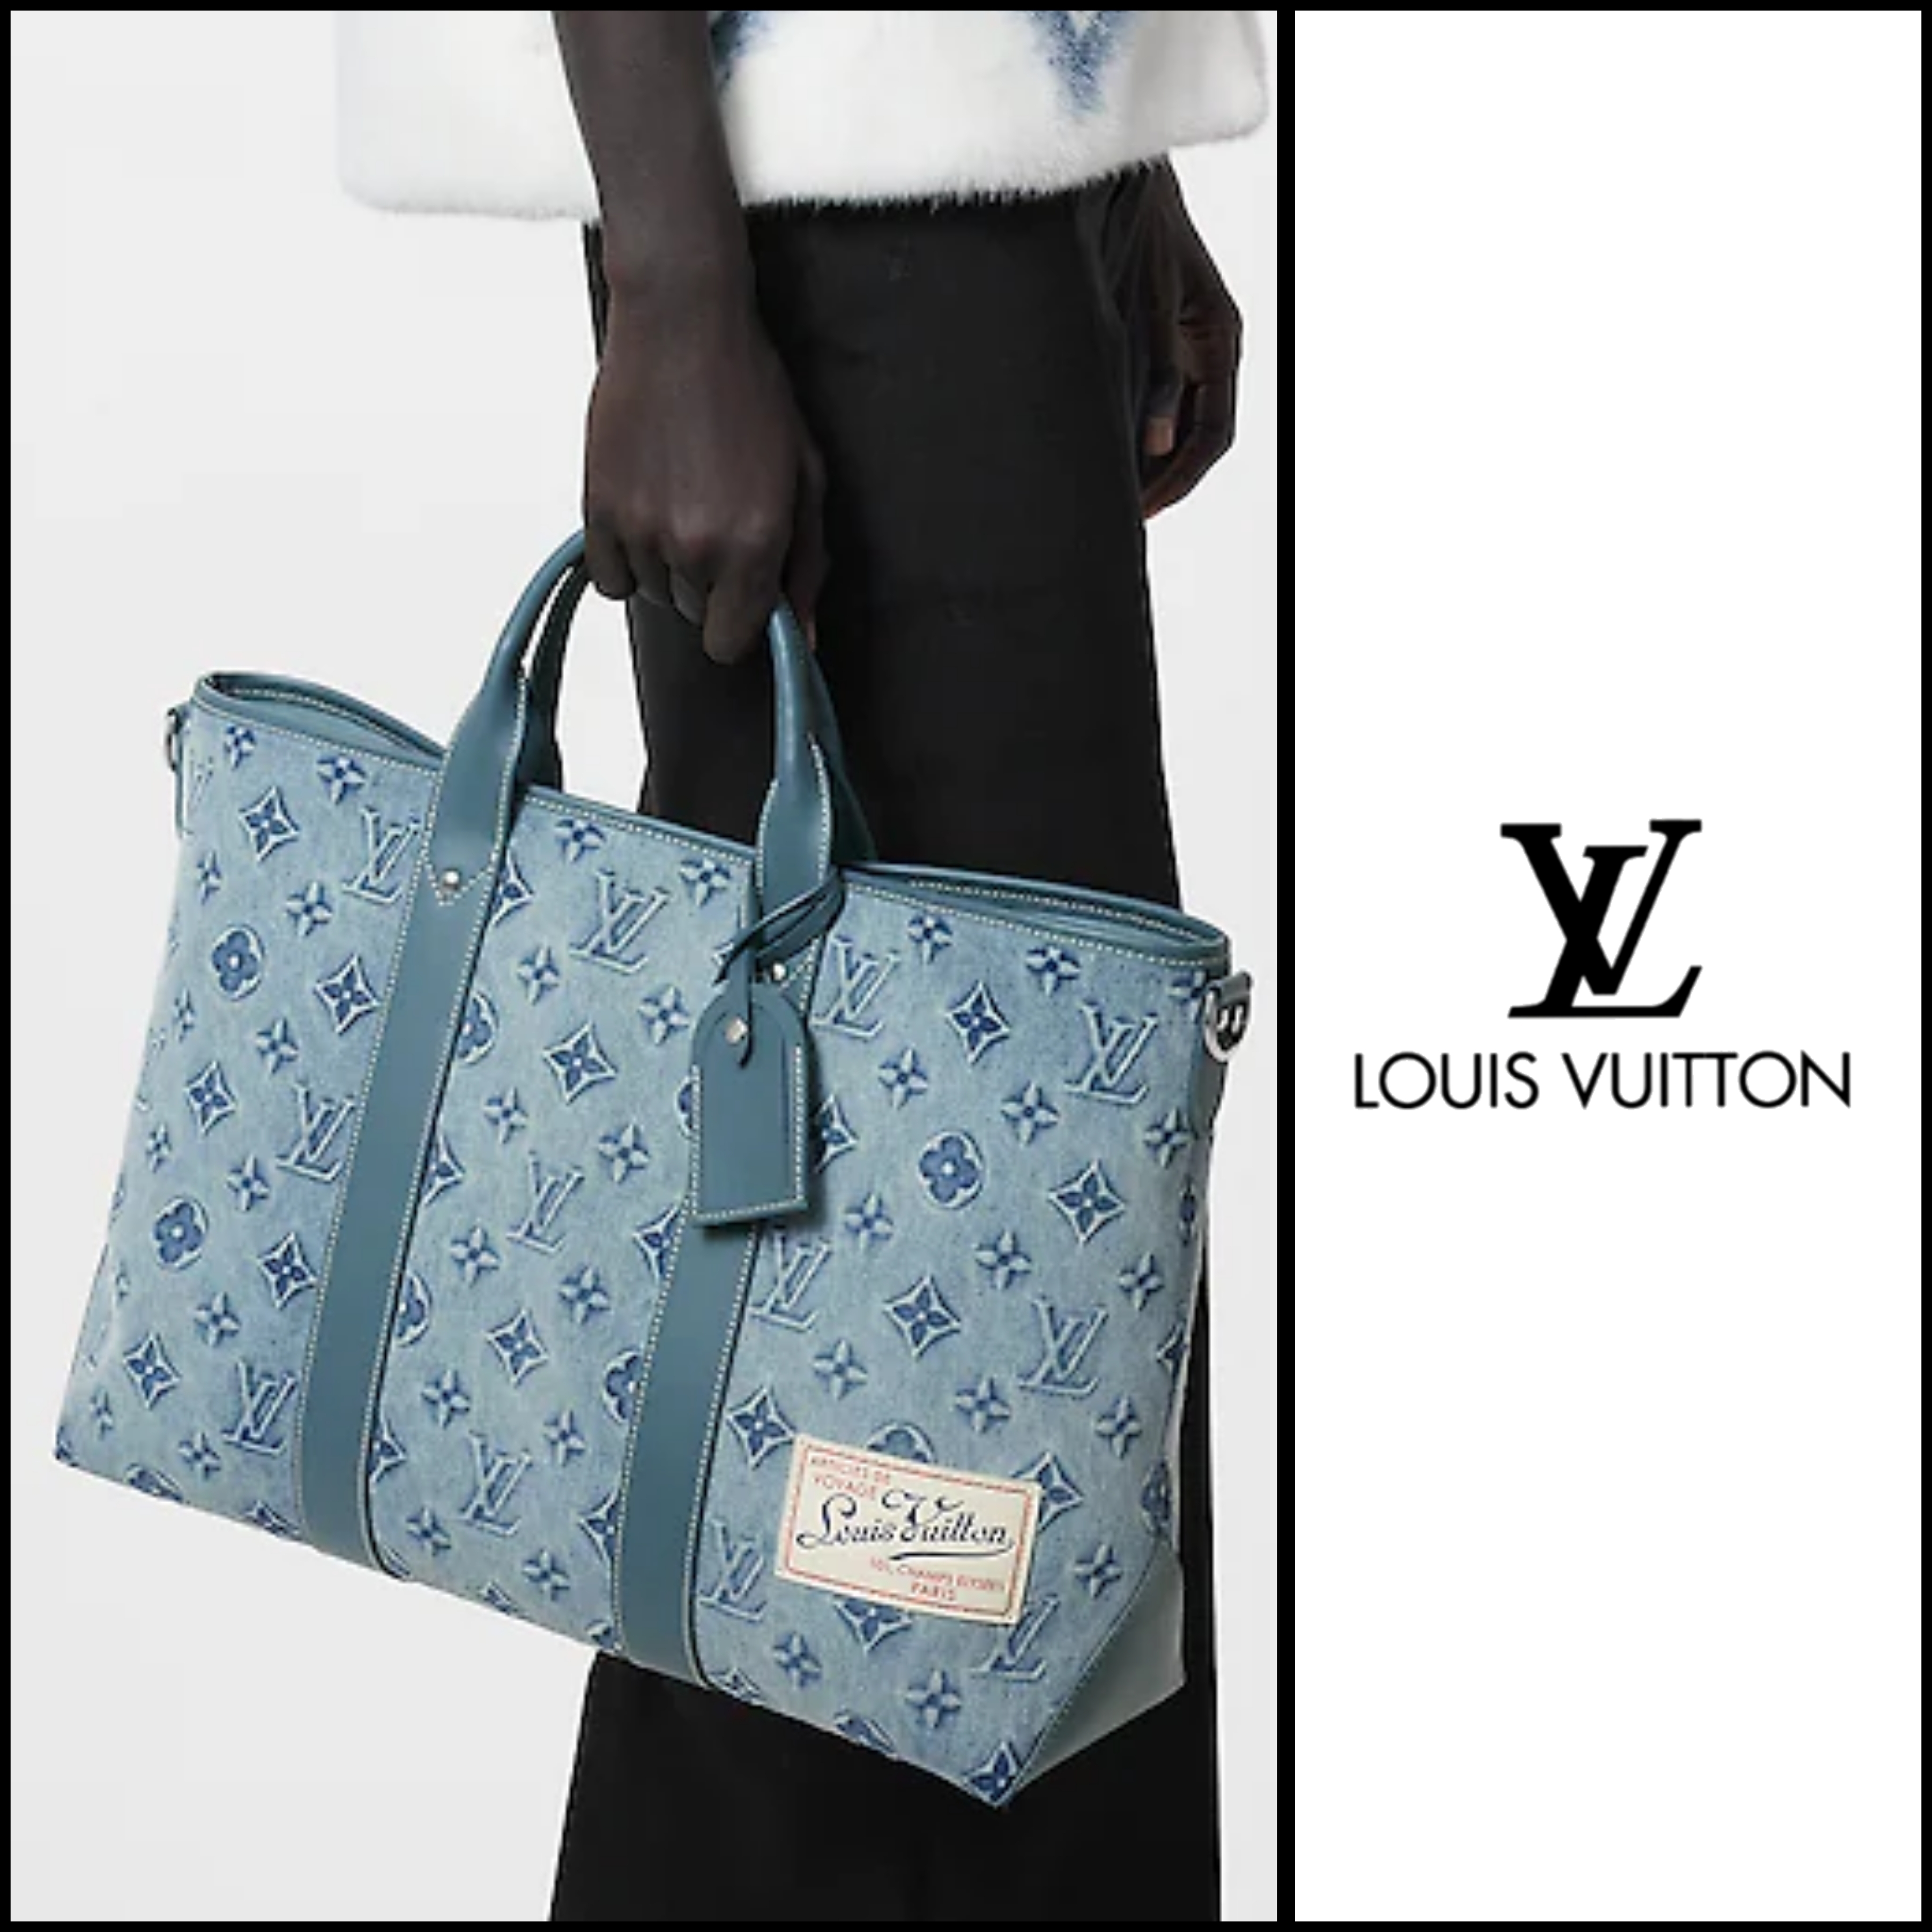 Louis Vuitton バッグ《Weekend》ブルー レザー ロゴ 直営店 M22537